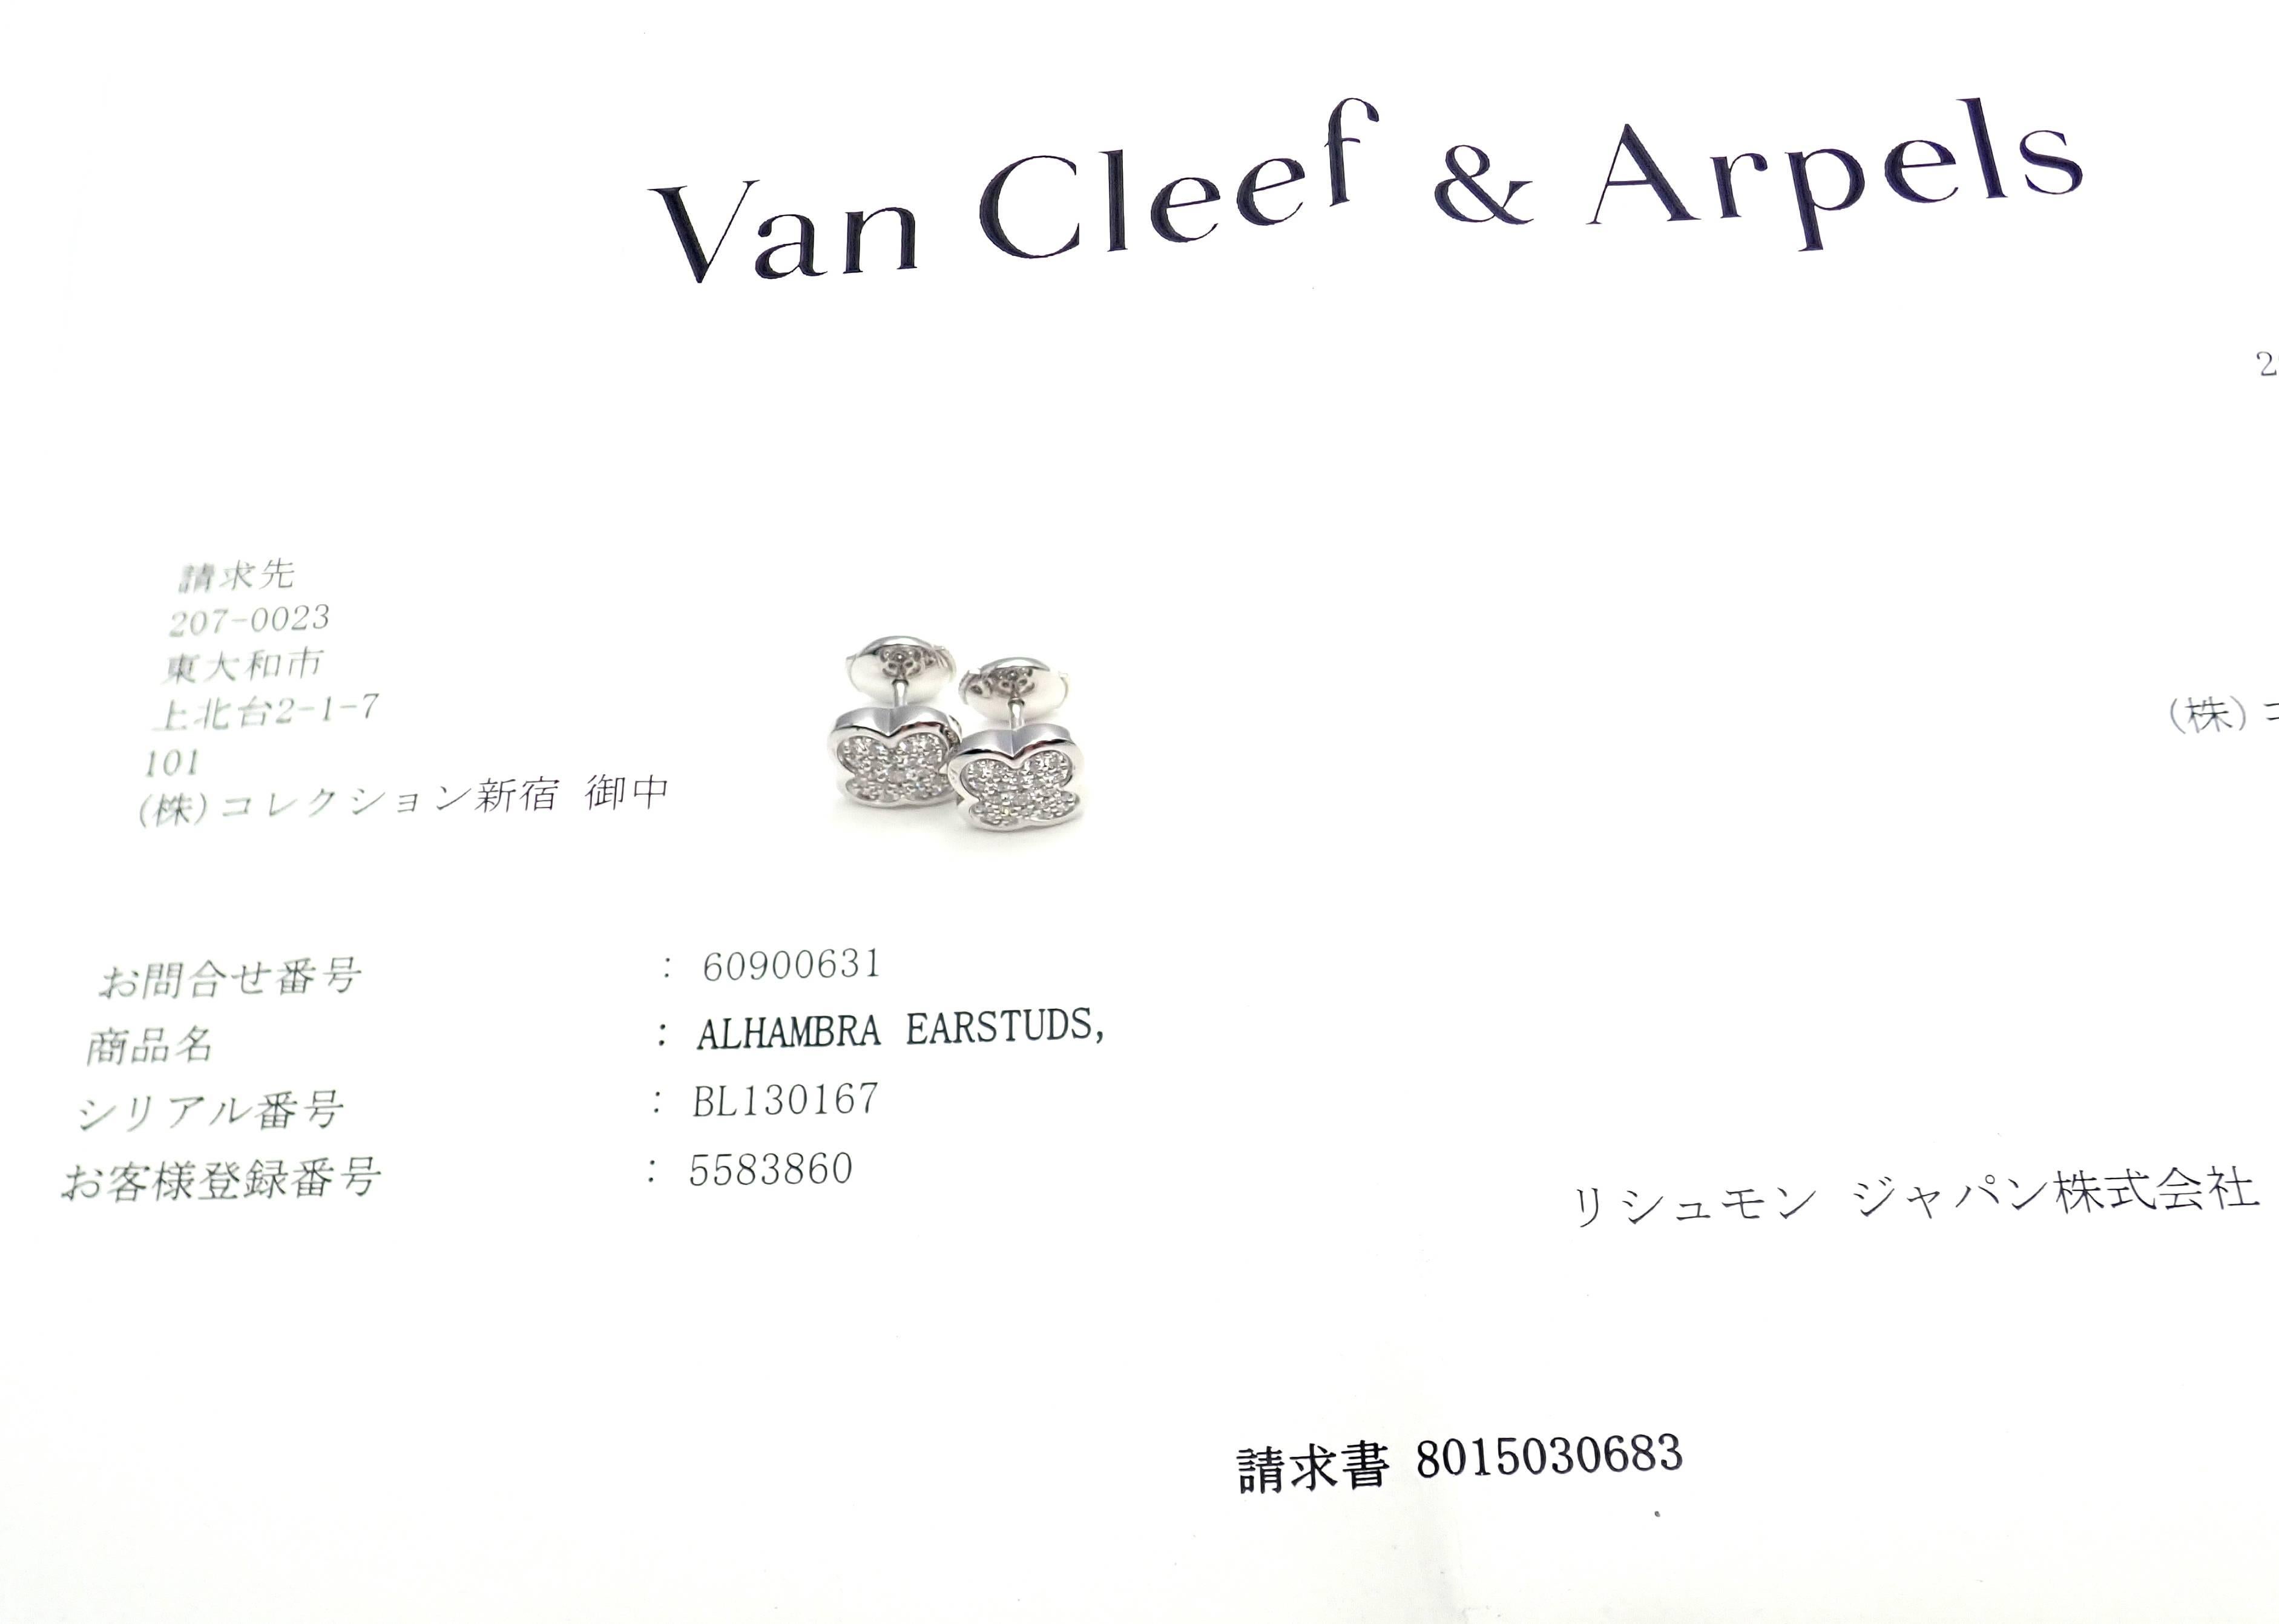 18k White Gold Diamond Pure Alhambra Earrings by Van Cleef & Arpels.
With 42 round brilliant cut diamonds VVS1 clarity, E color total weight approx. .38ct
These earrings are for pierced ears.
These earrings come with service paper from VCA store in